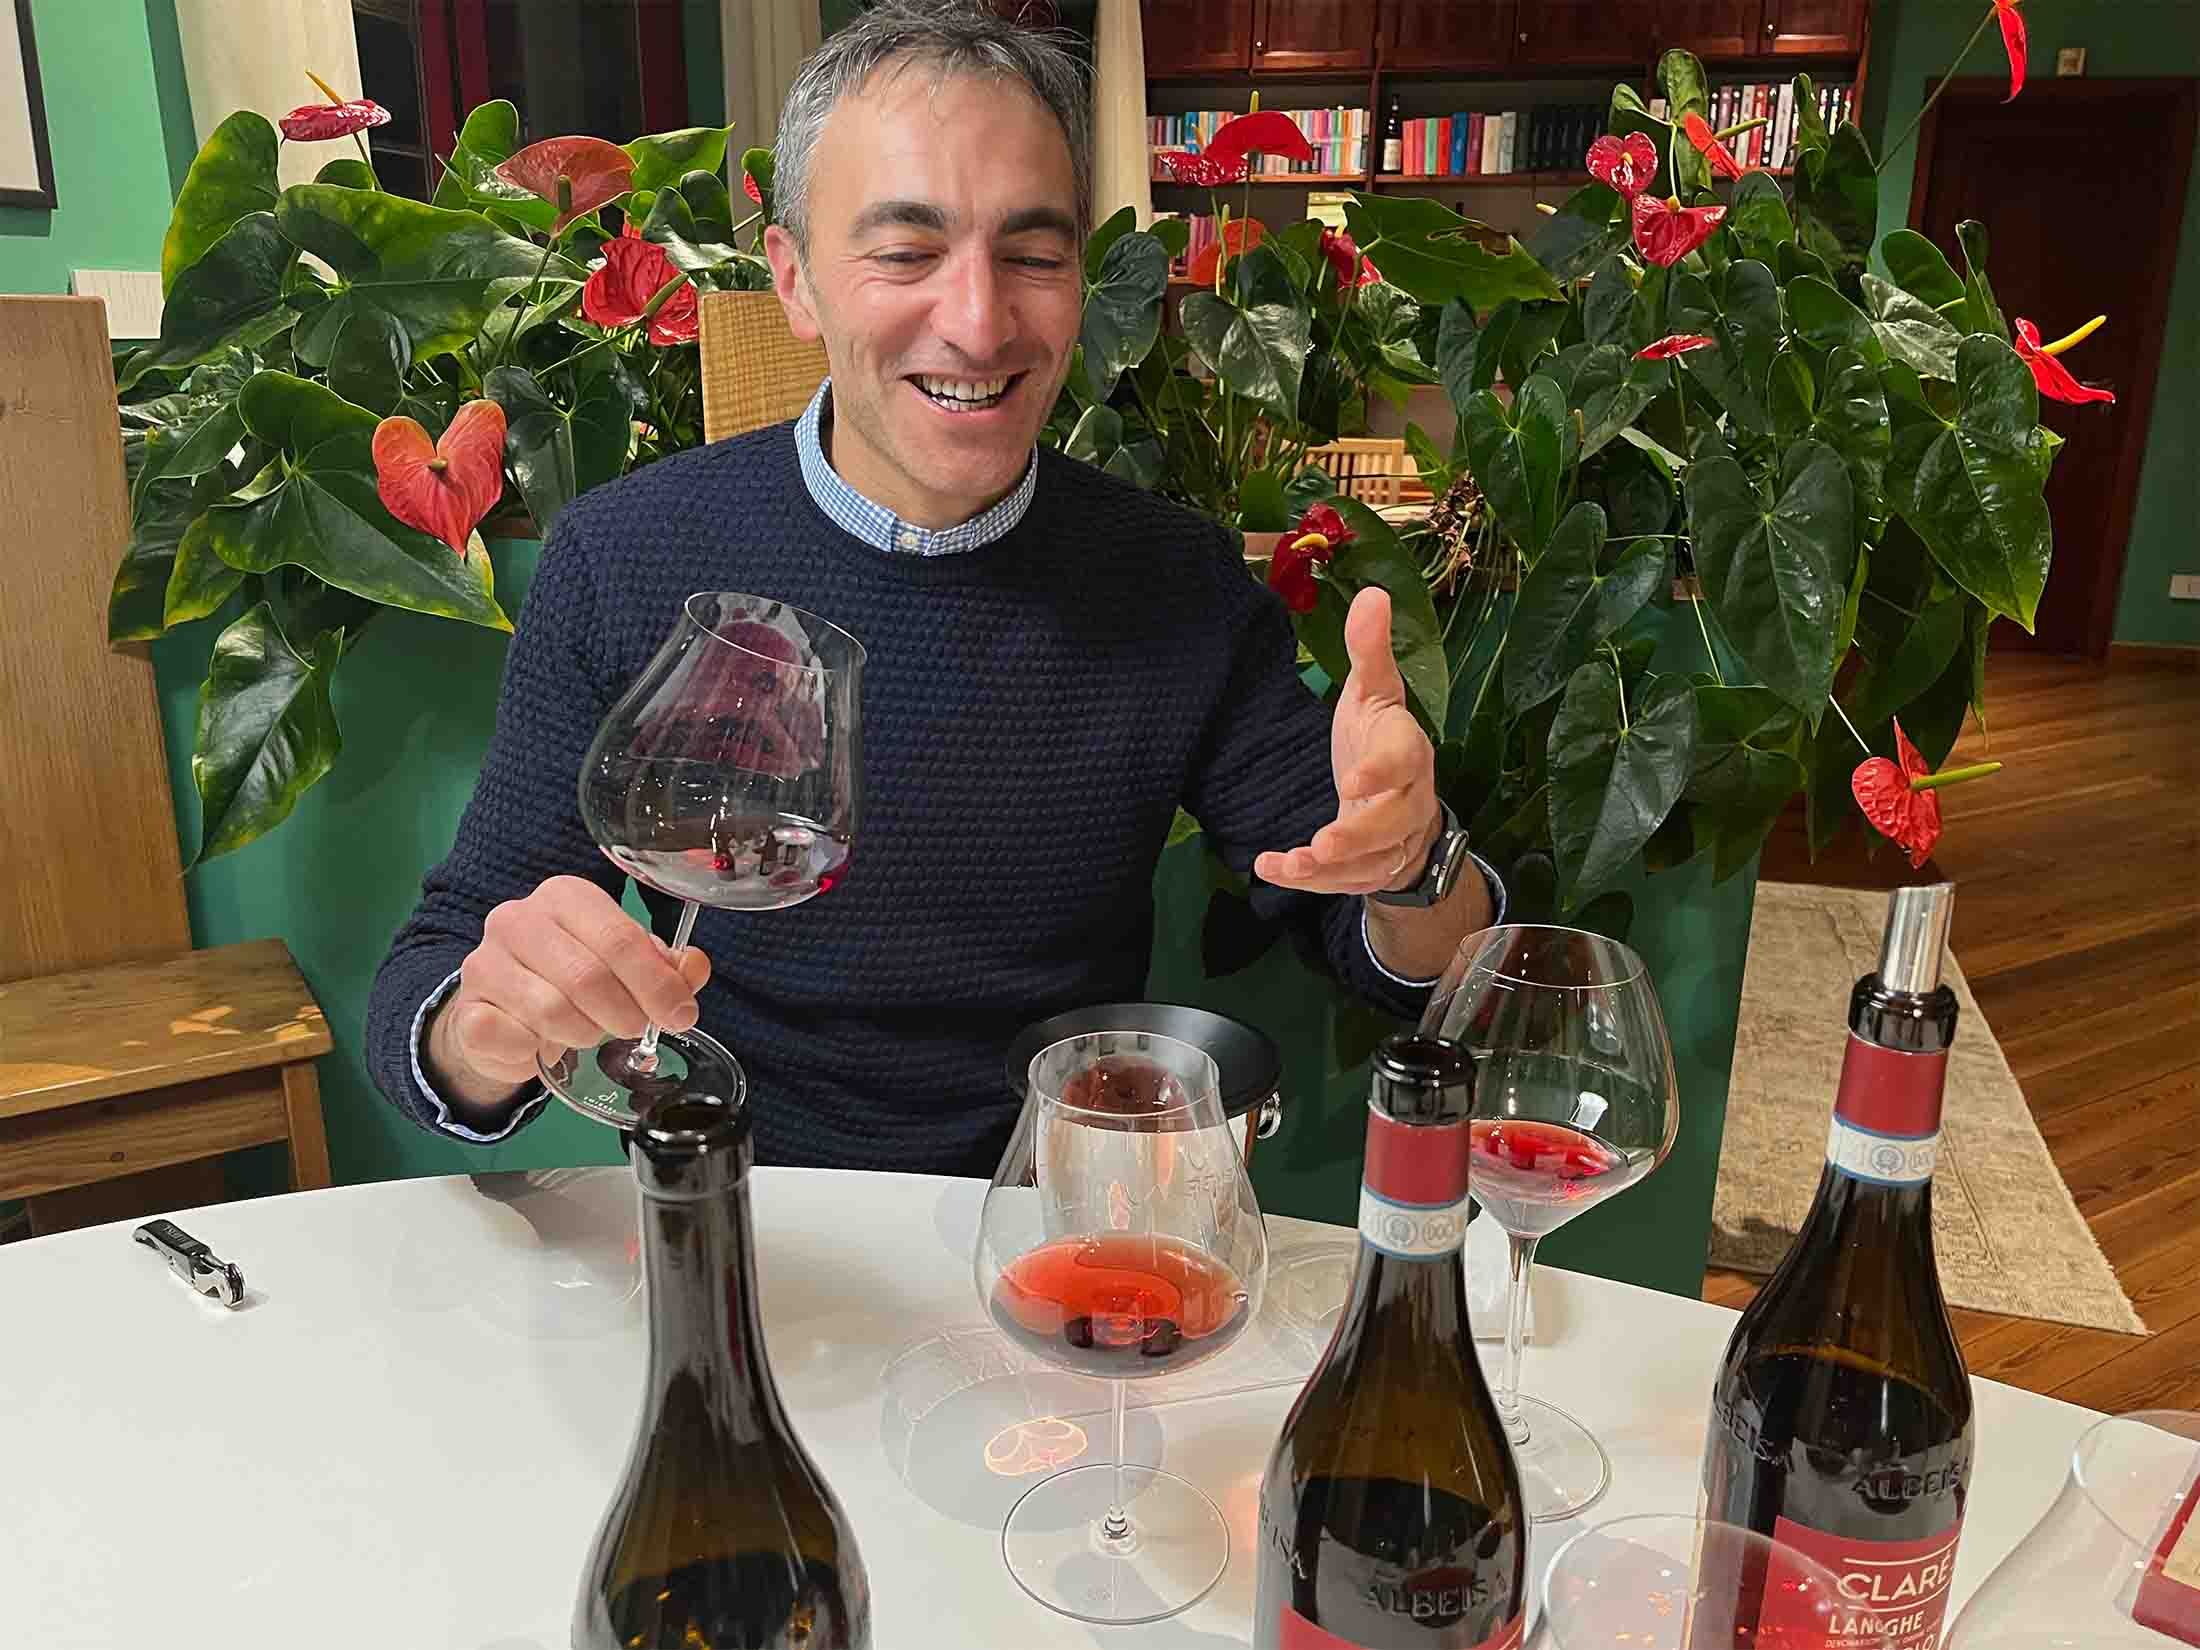 Giuseppe Vaira tastes vintages of his alt_Nebbiolo inspired by the writings of Thomas Jefferson